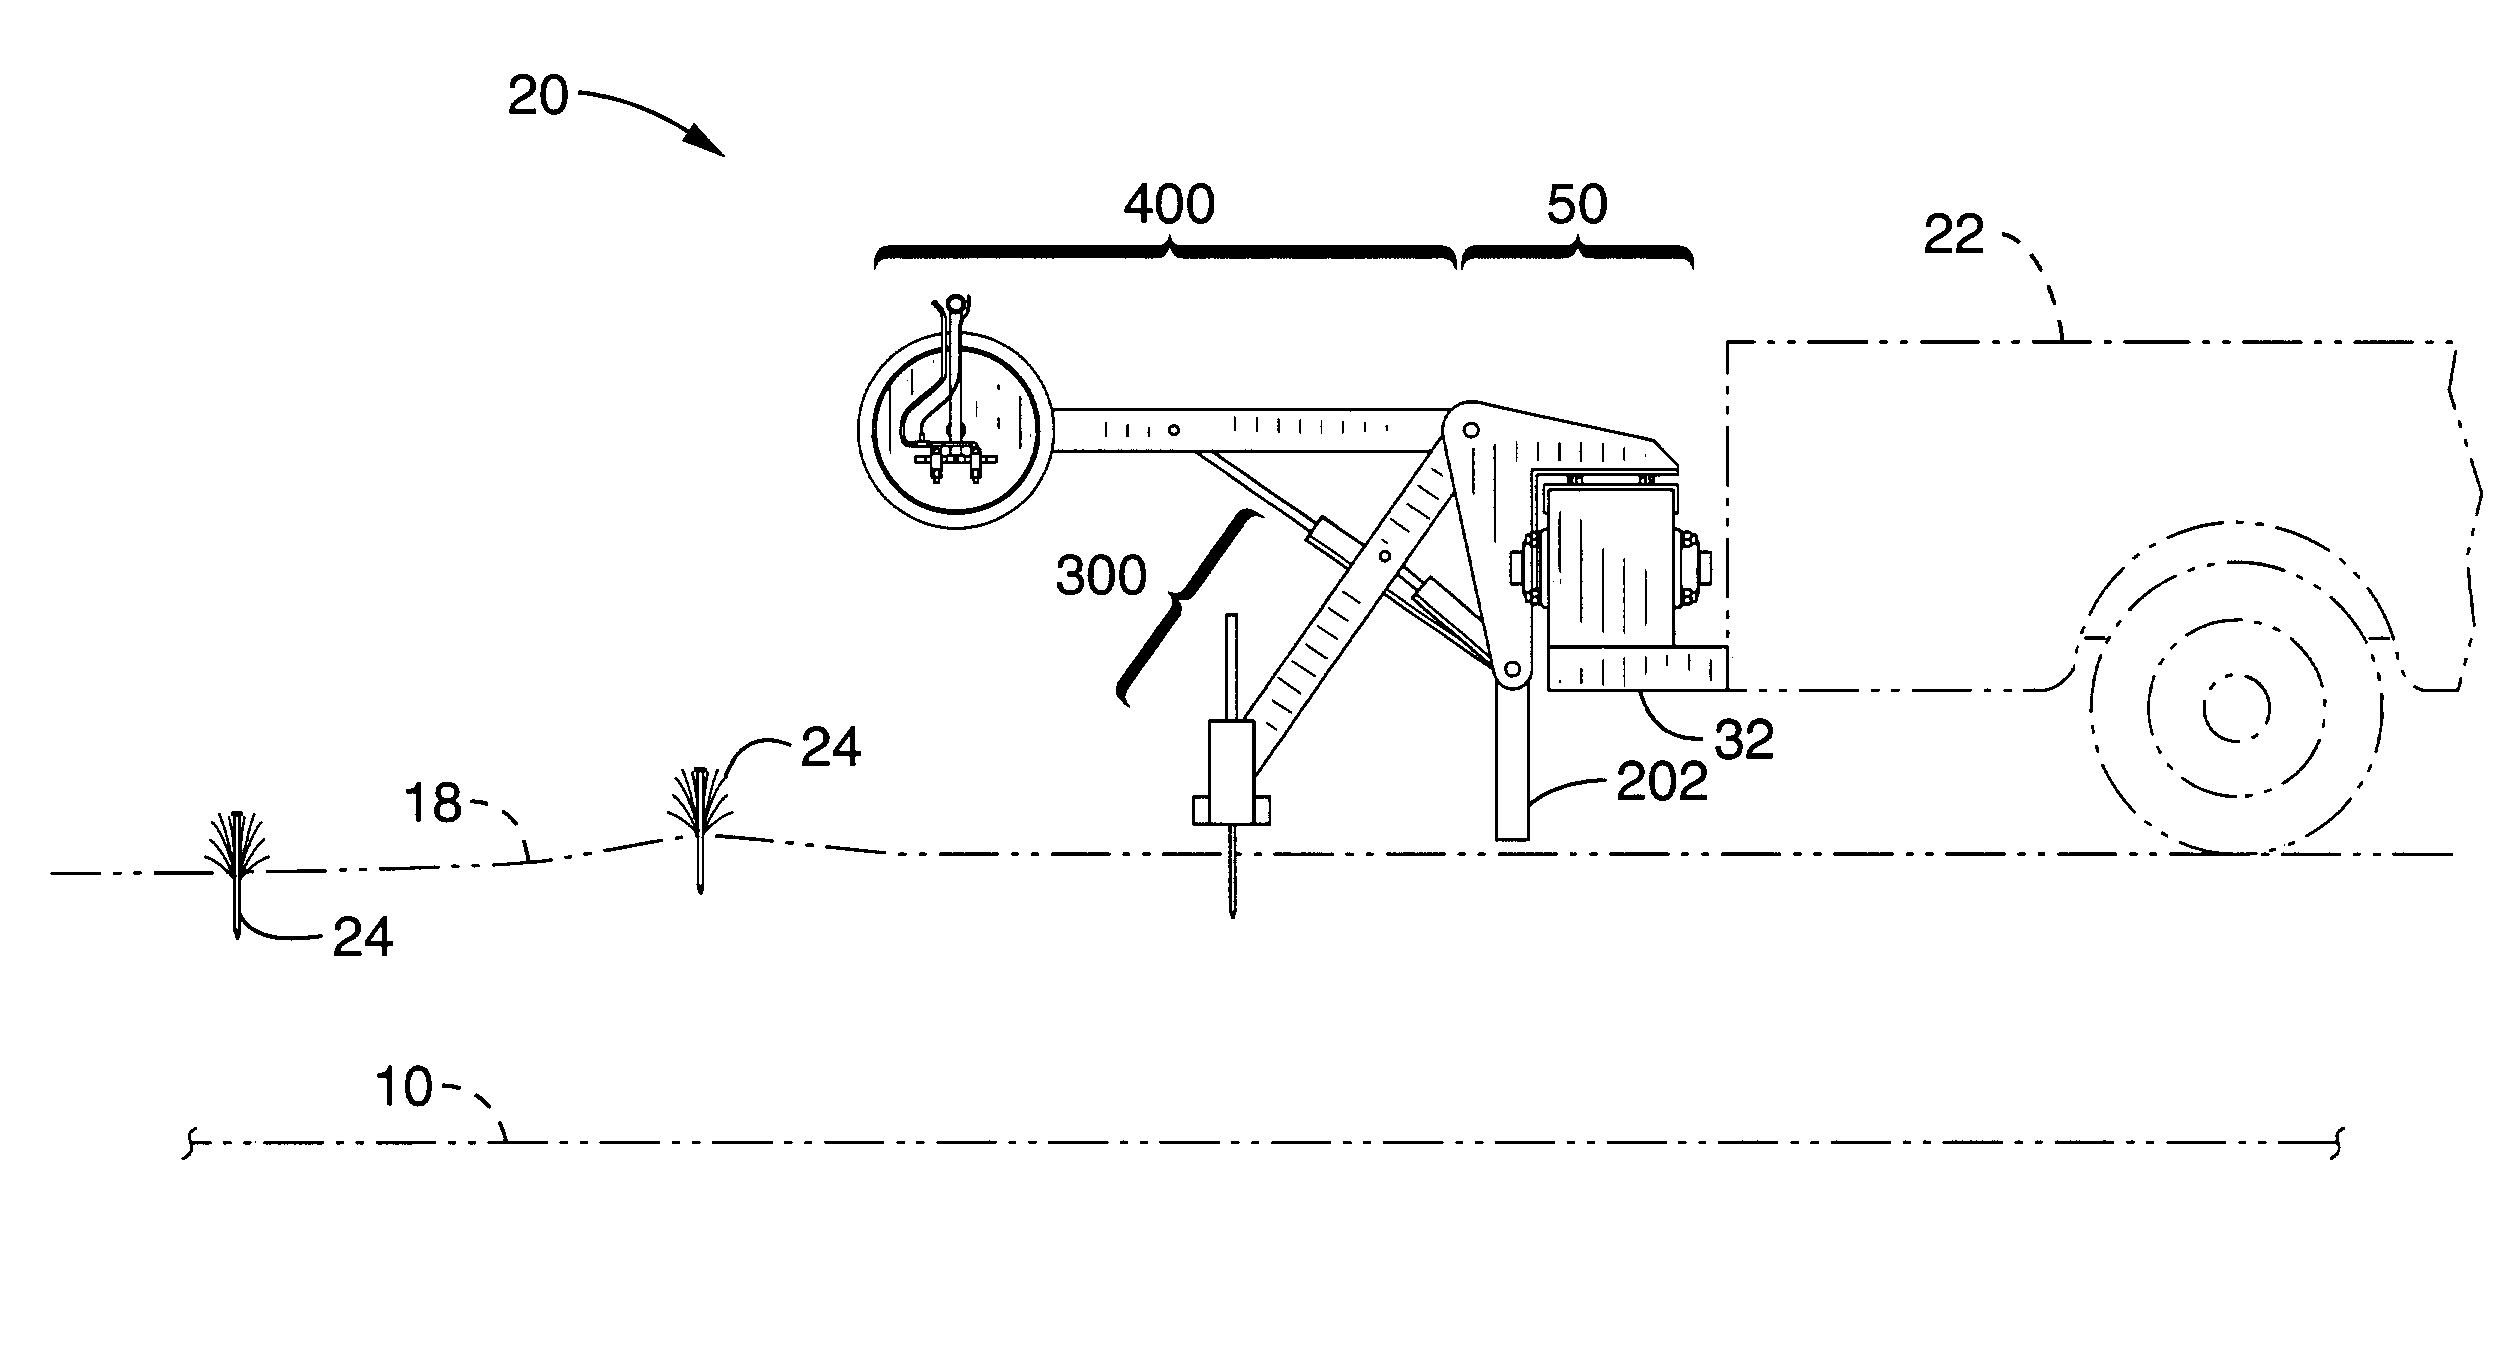 Apparatus and method for locating and marking an underground utility